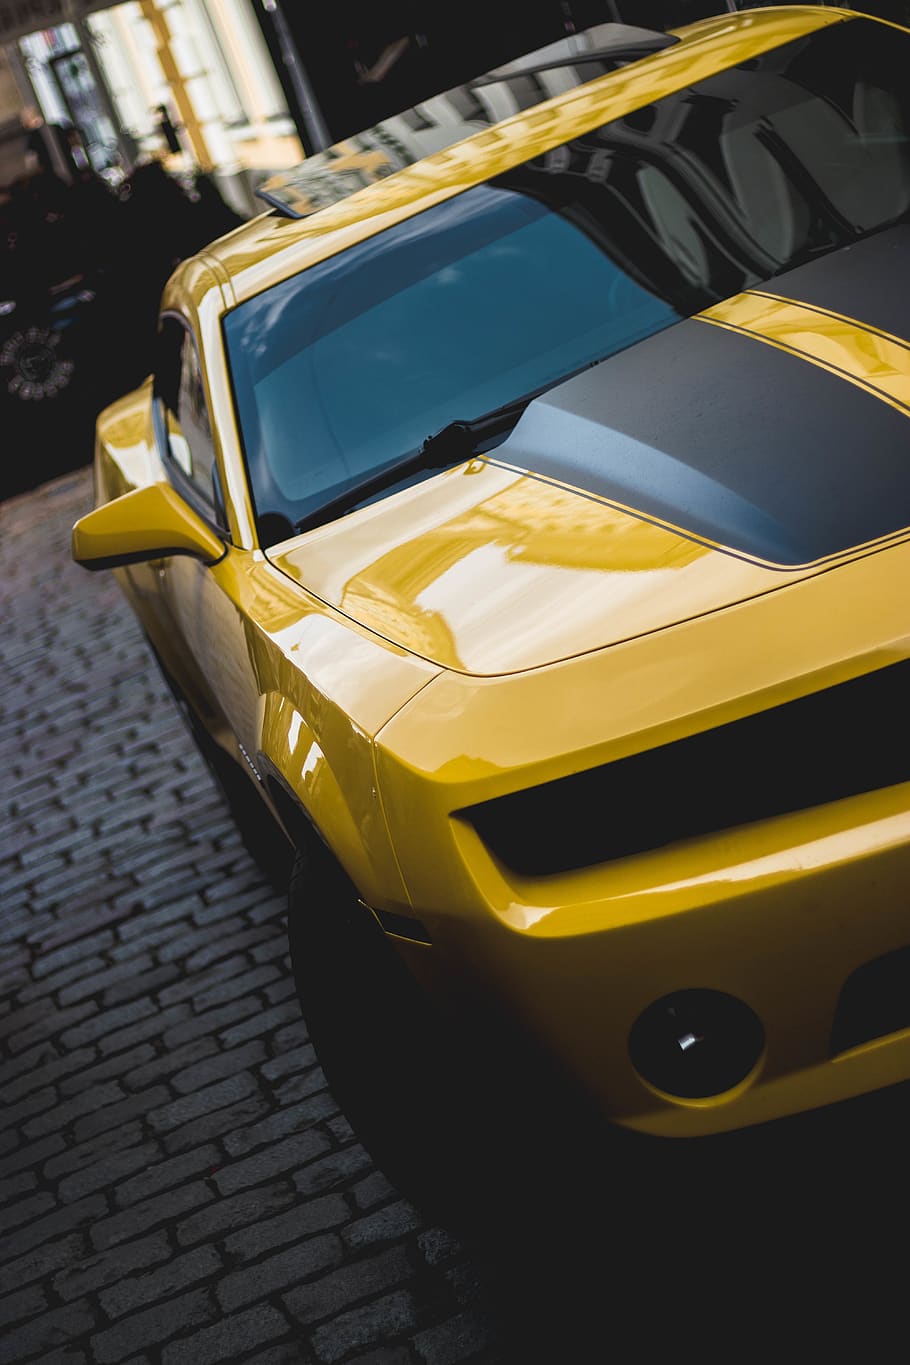 ford, mustang, muscle, car, autosport, yellow, luxury, bumble